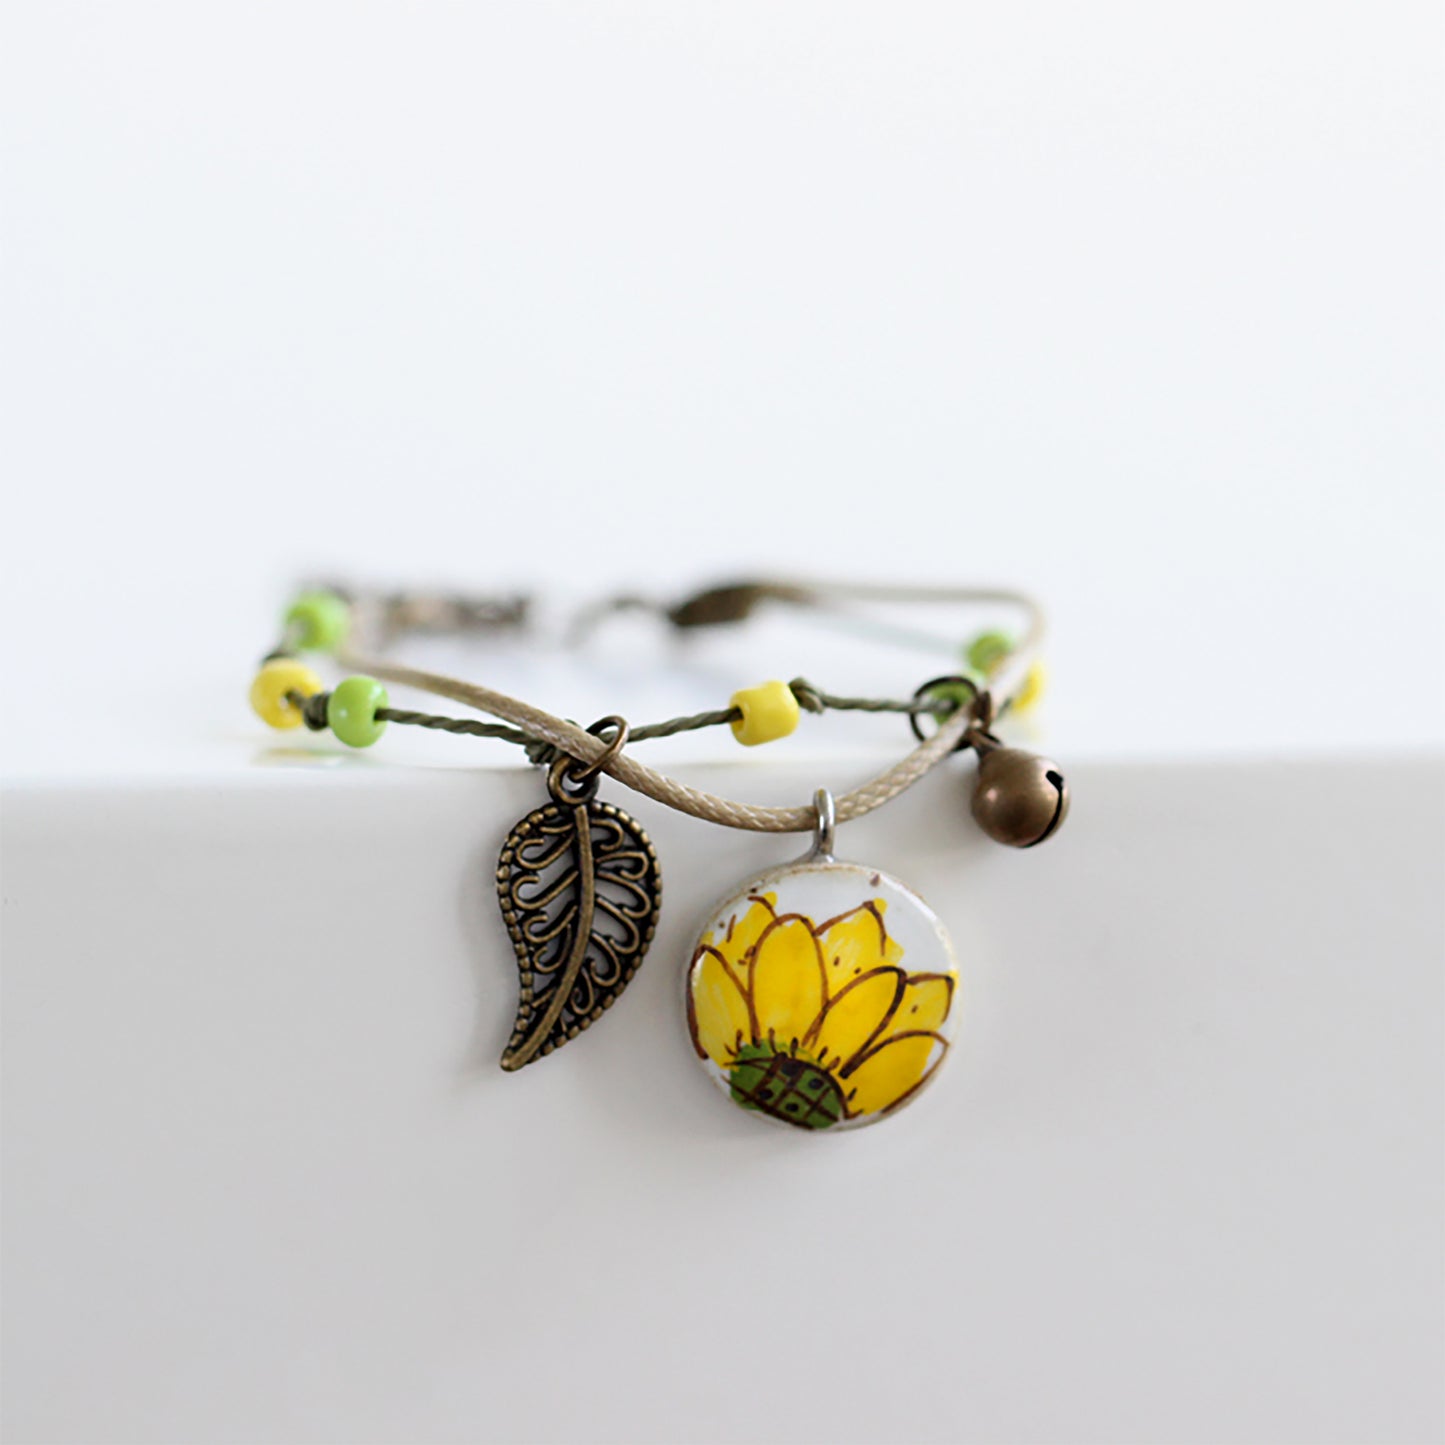 Sunflower Clay Bracelet: Hand painted and handmade ceramic sunflower wristband bracelet for women and girls inspired by Frida Kahlo and Mexican Folk Art Jewelry